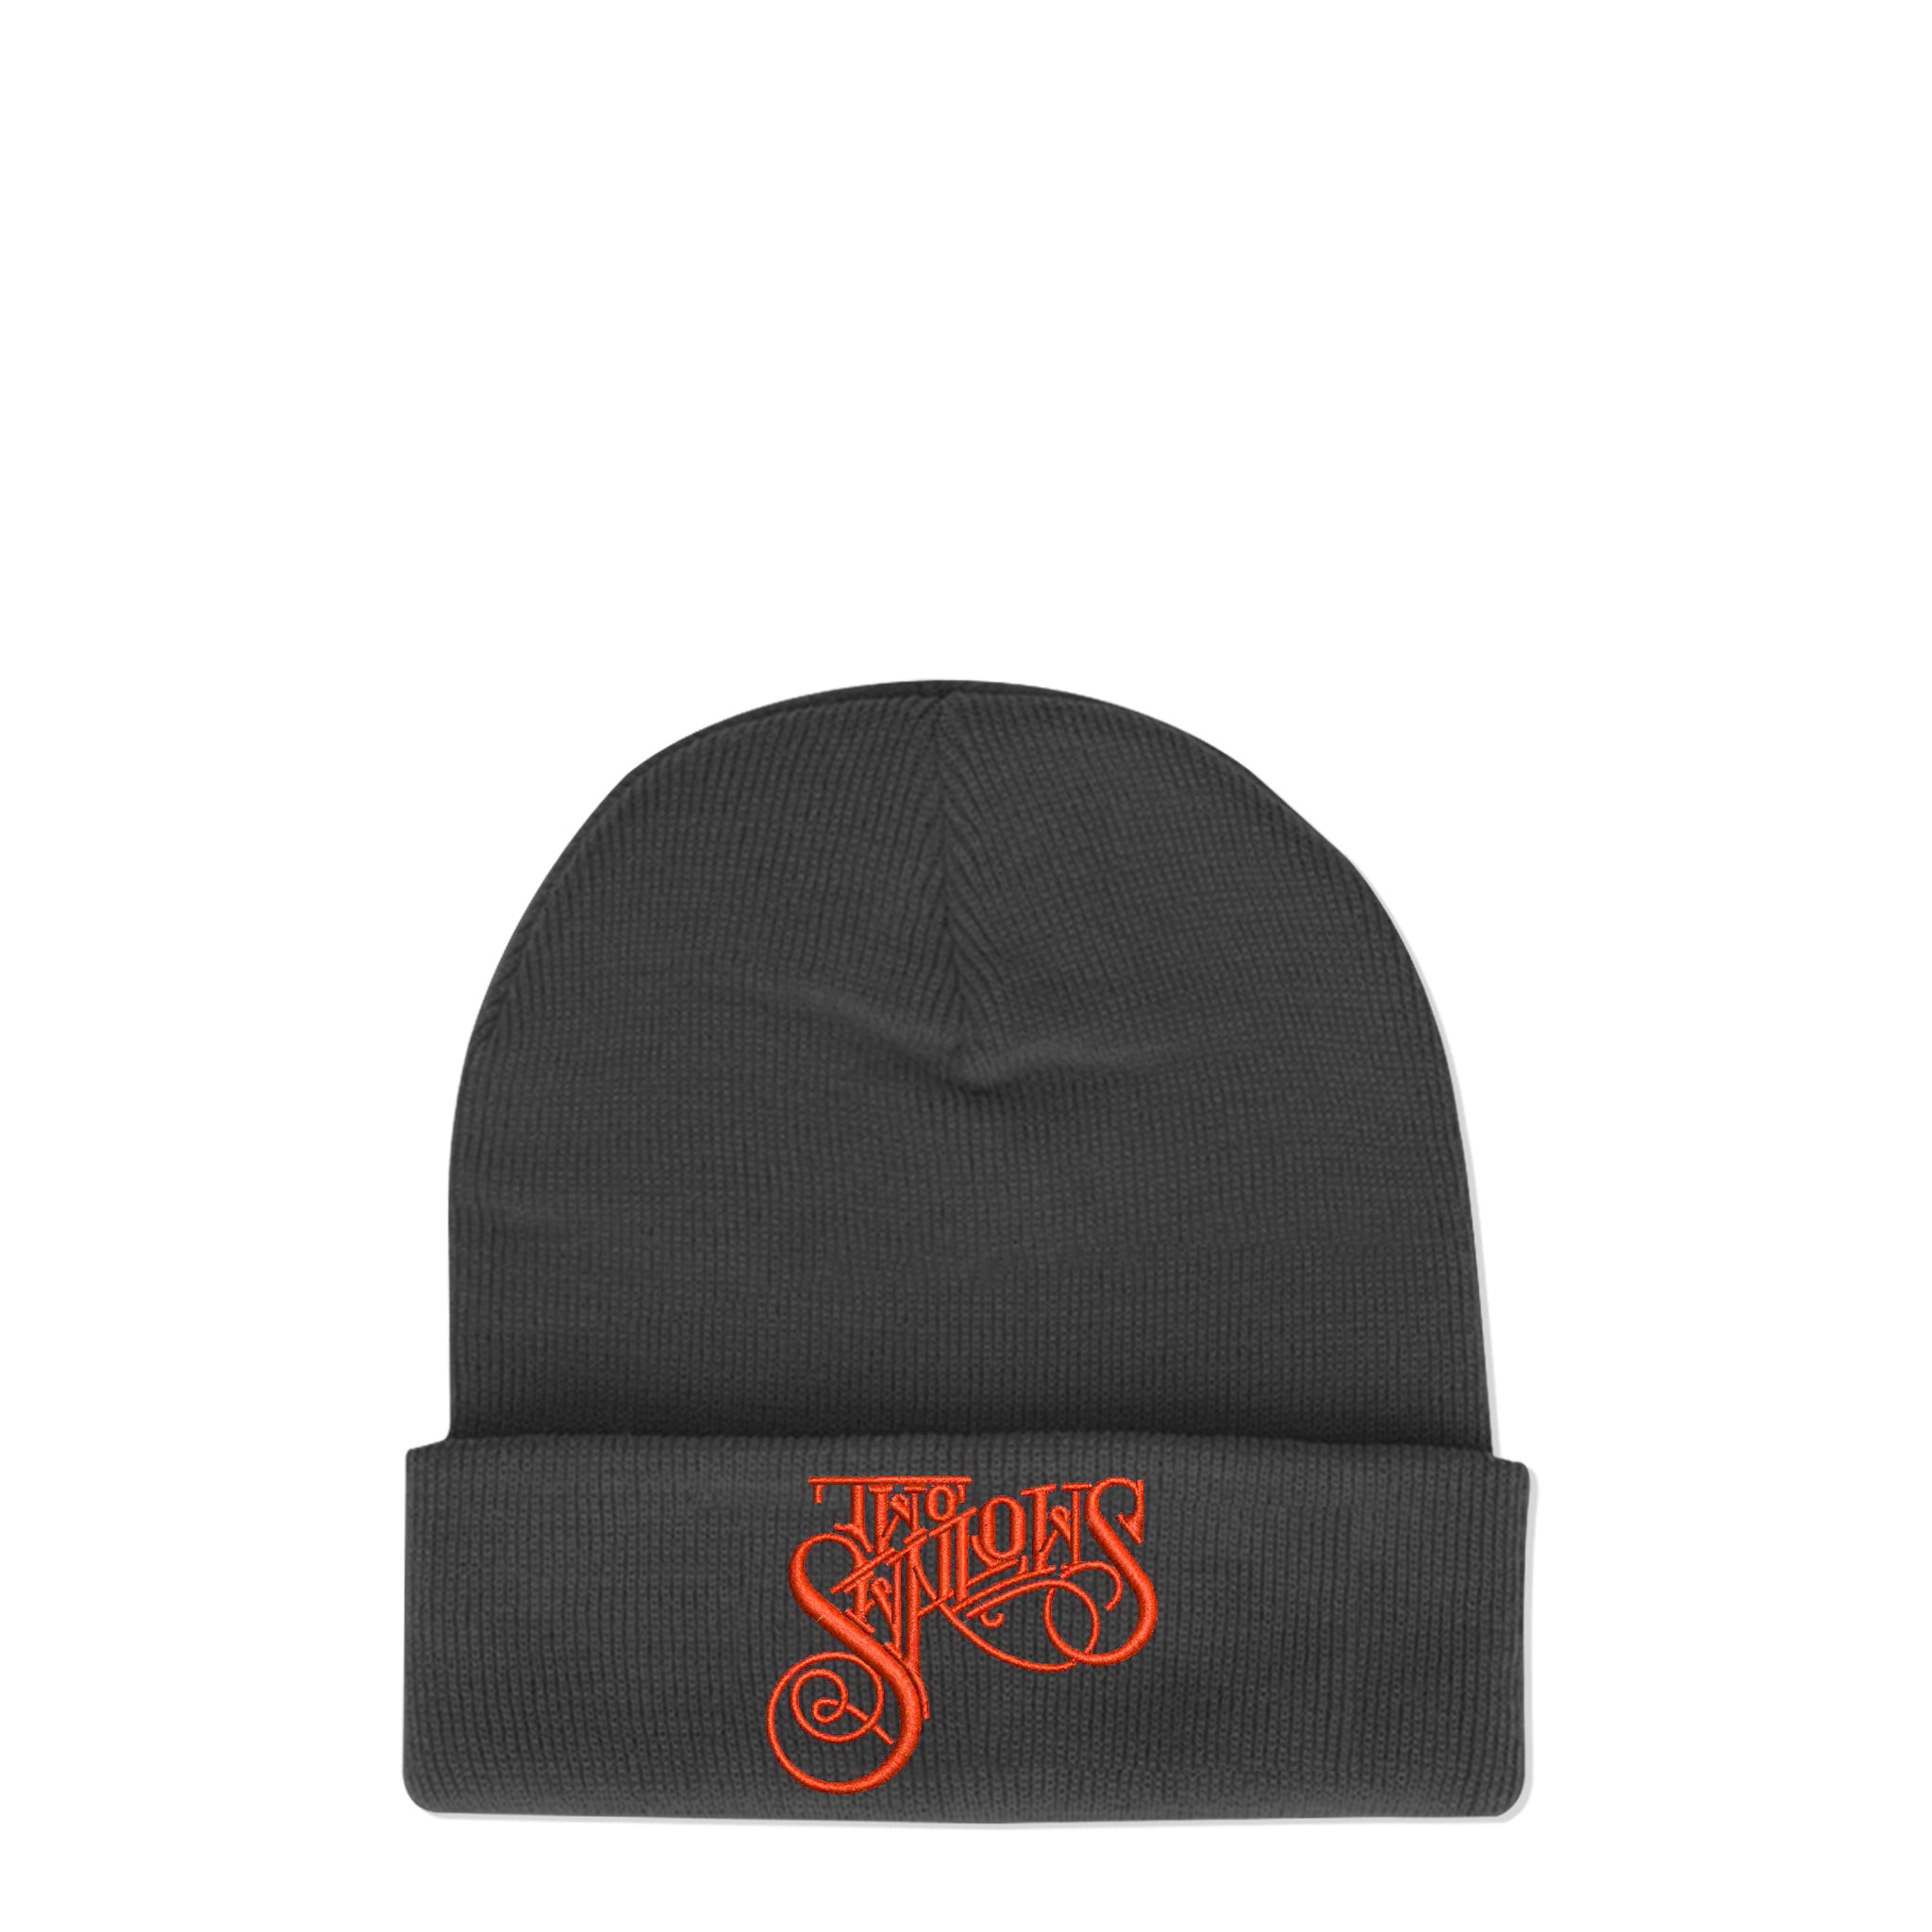 Two Swallows Beanie – Charcoal